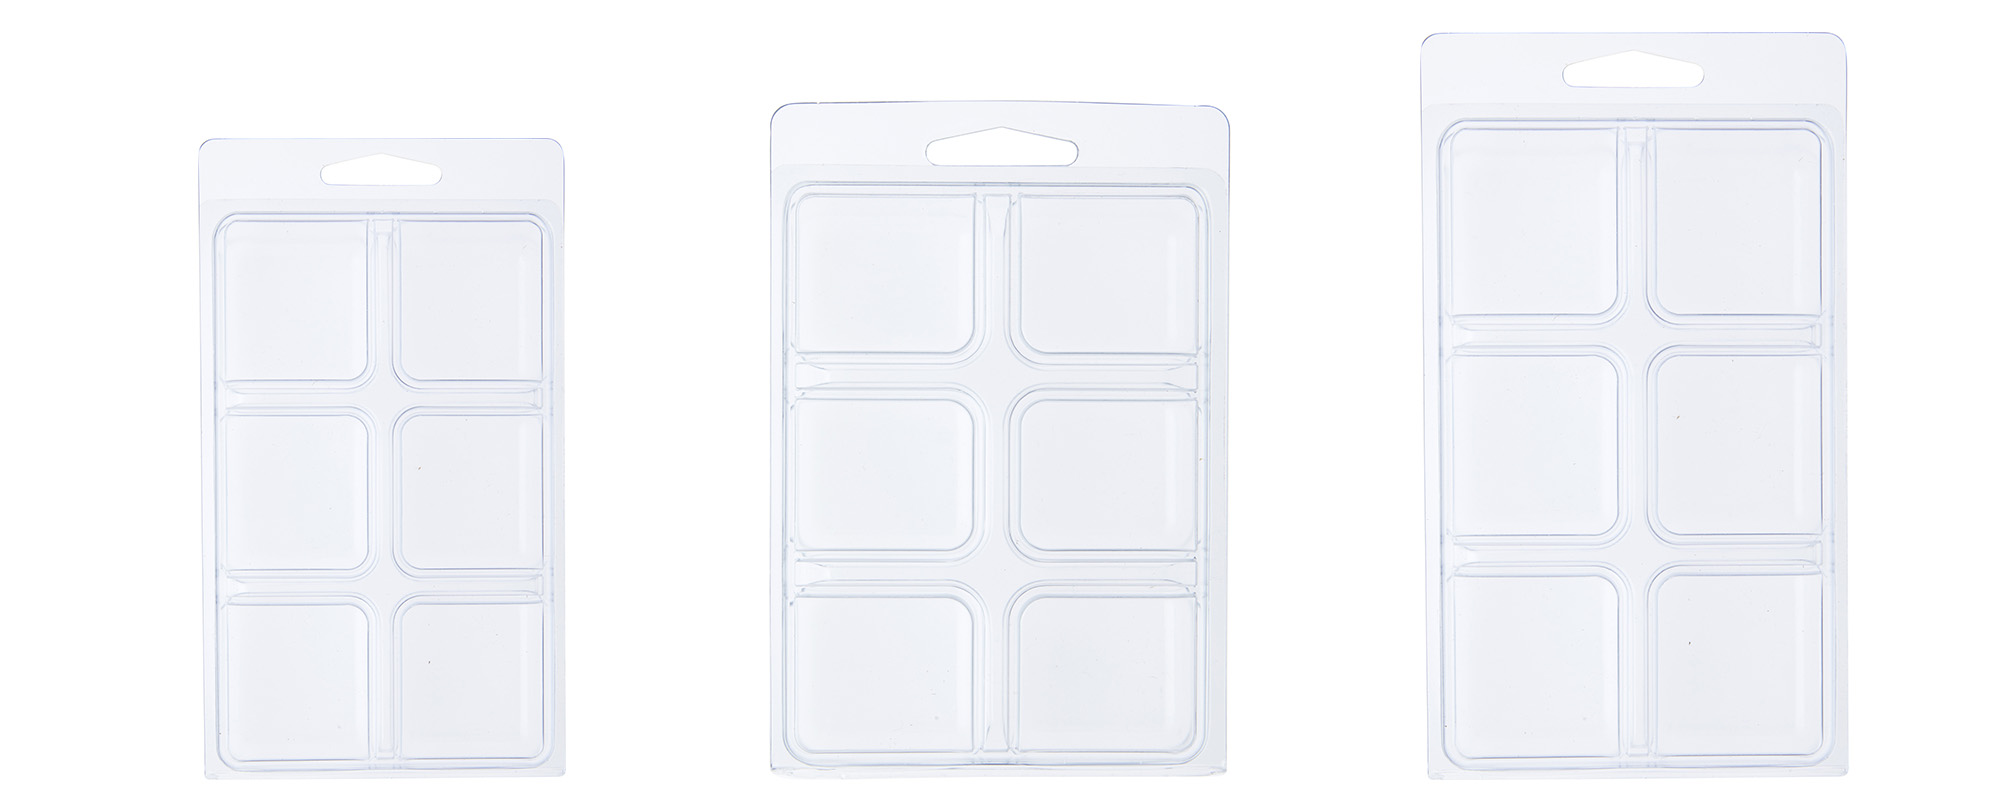 Clamshell Package / Storage Containers with Compartments